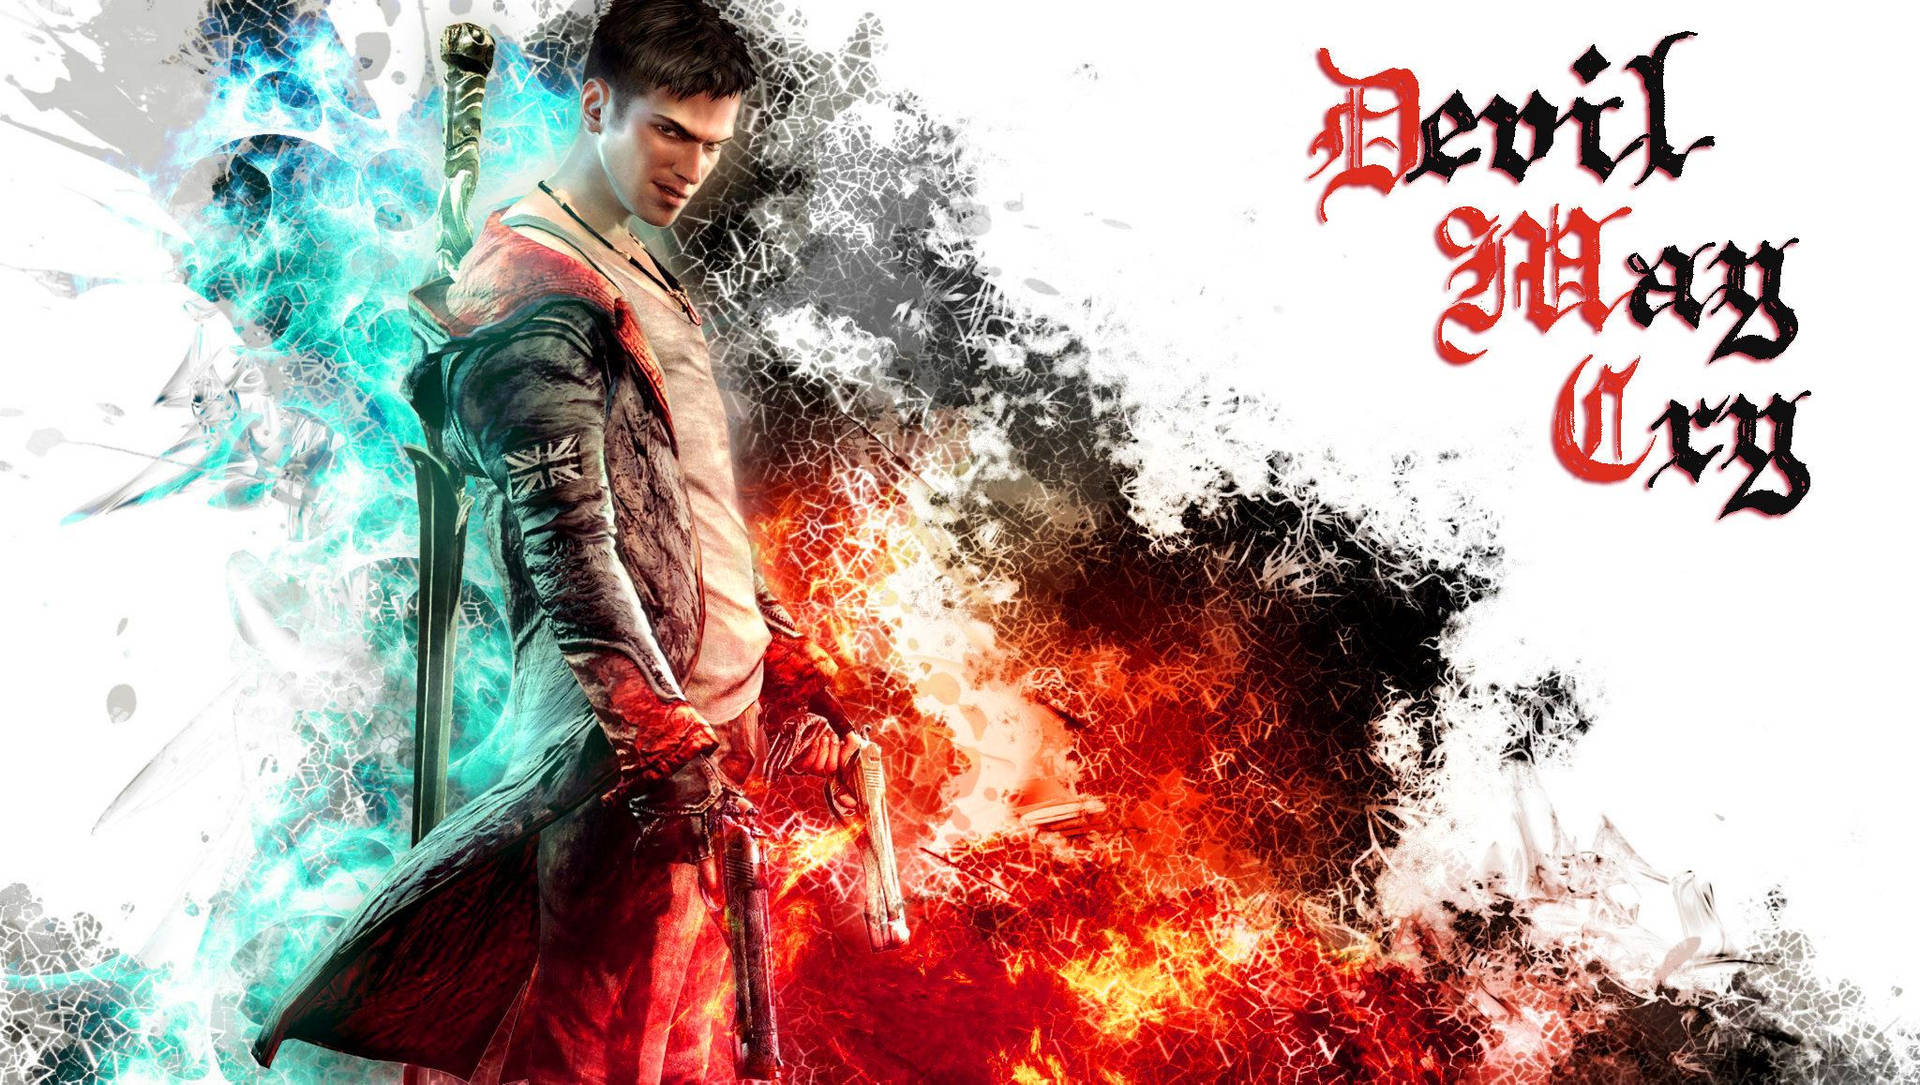 Dante Devil May Cry Poster